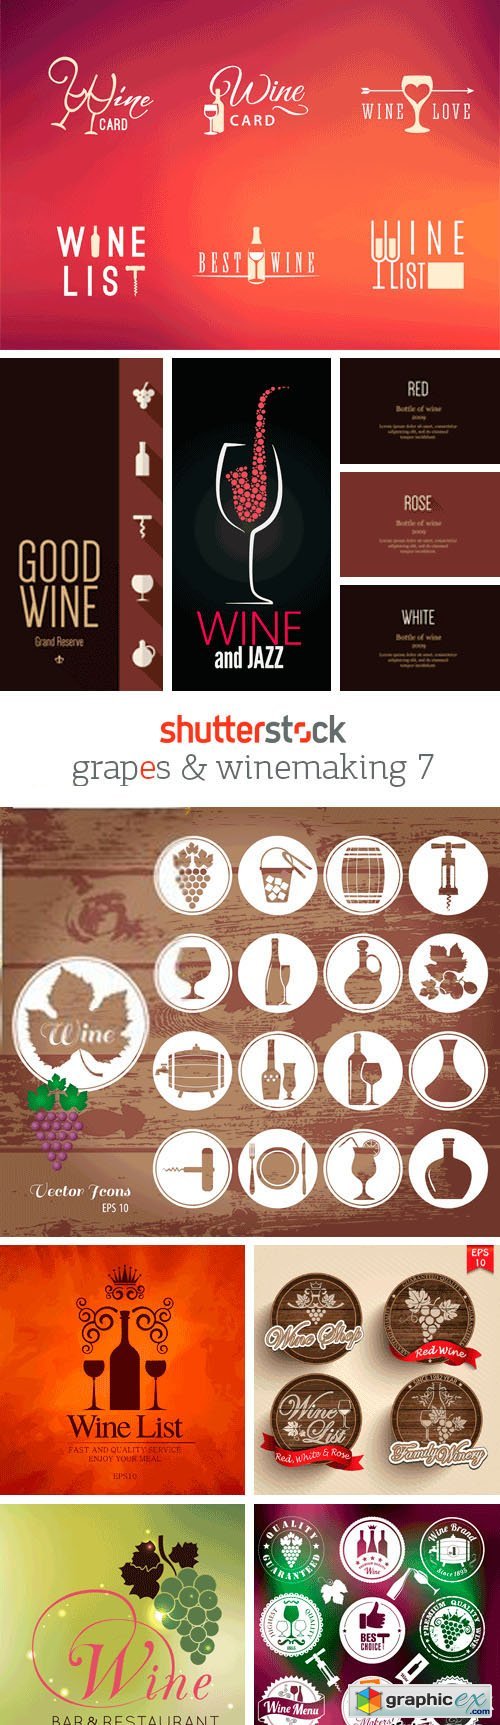 Amazing SS - Grapes & Winemaking 7, 25xEPS